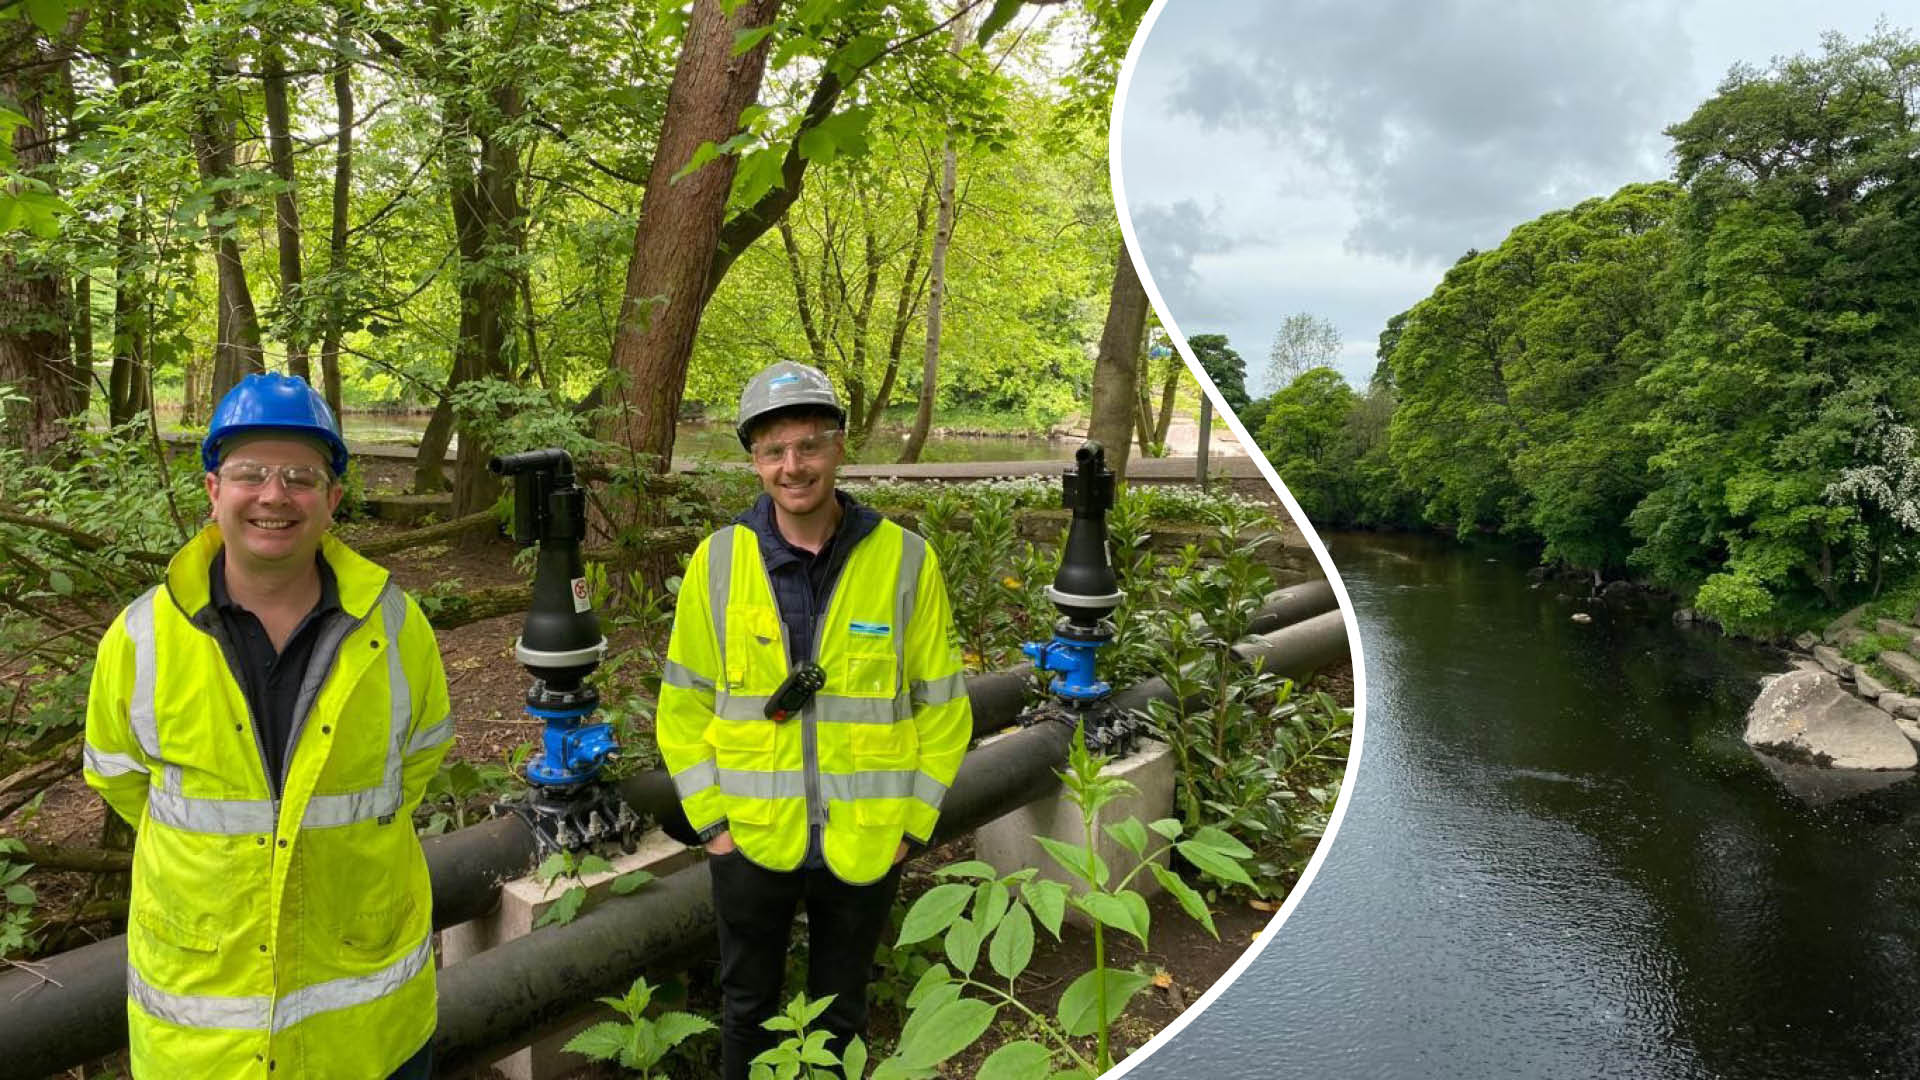 Smart Water Air Valve Averts River Pollution Incident at Ilkley